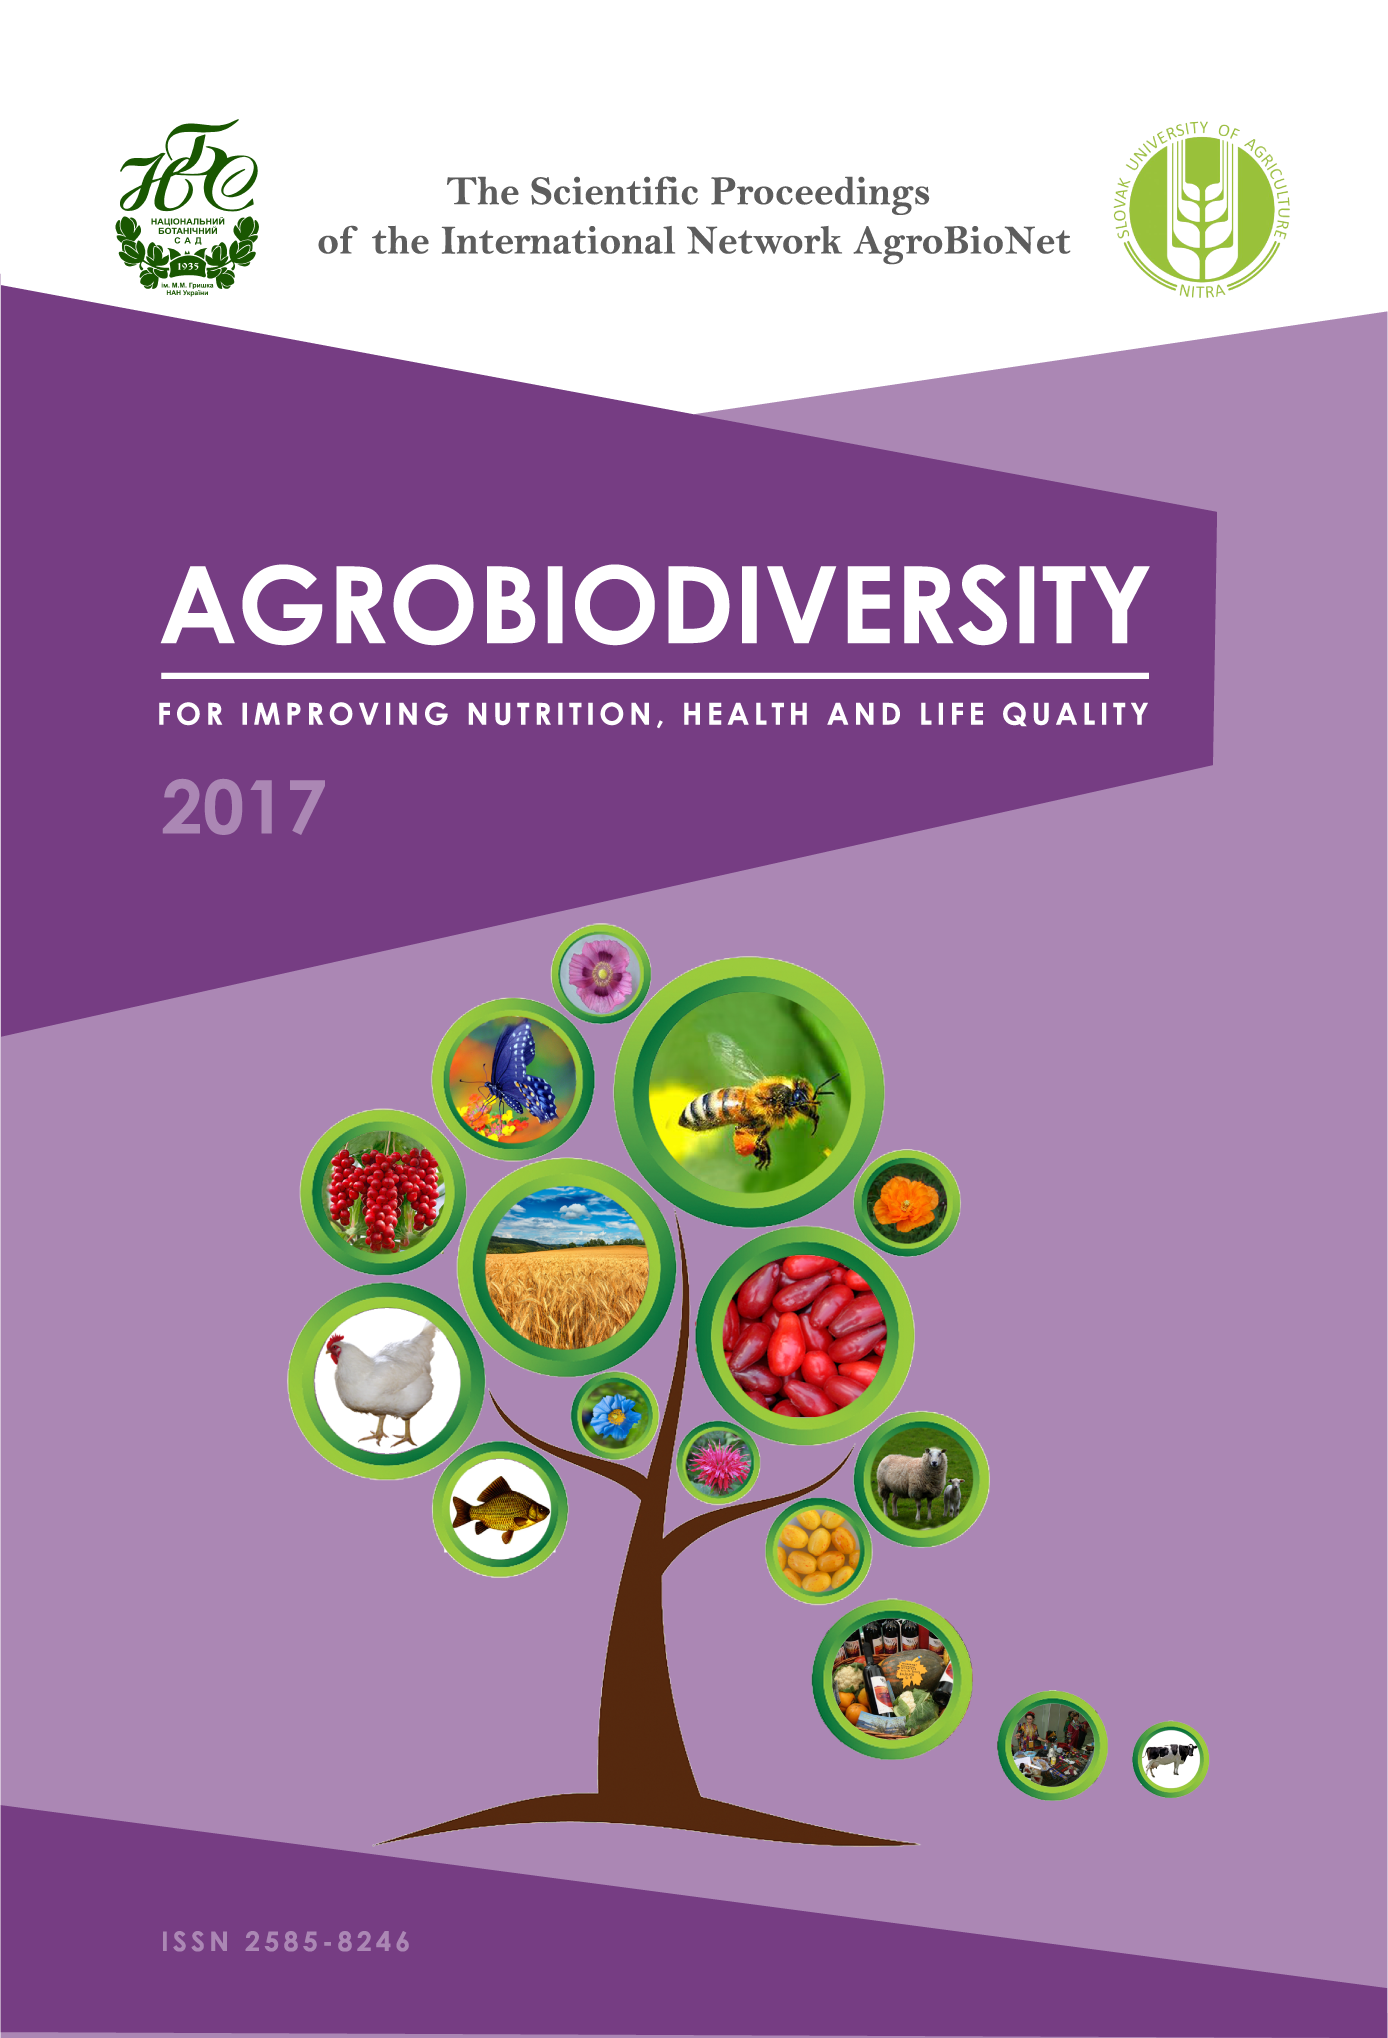 Agrobiodiversity for Improving Nutrition, Health and Life Quality